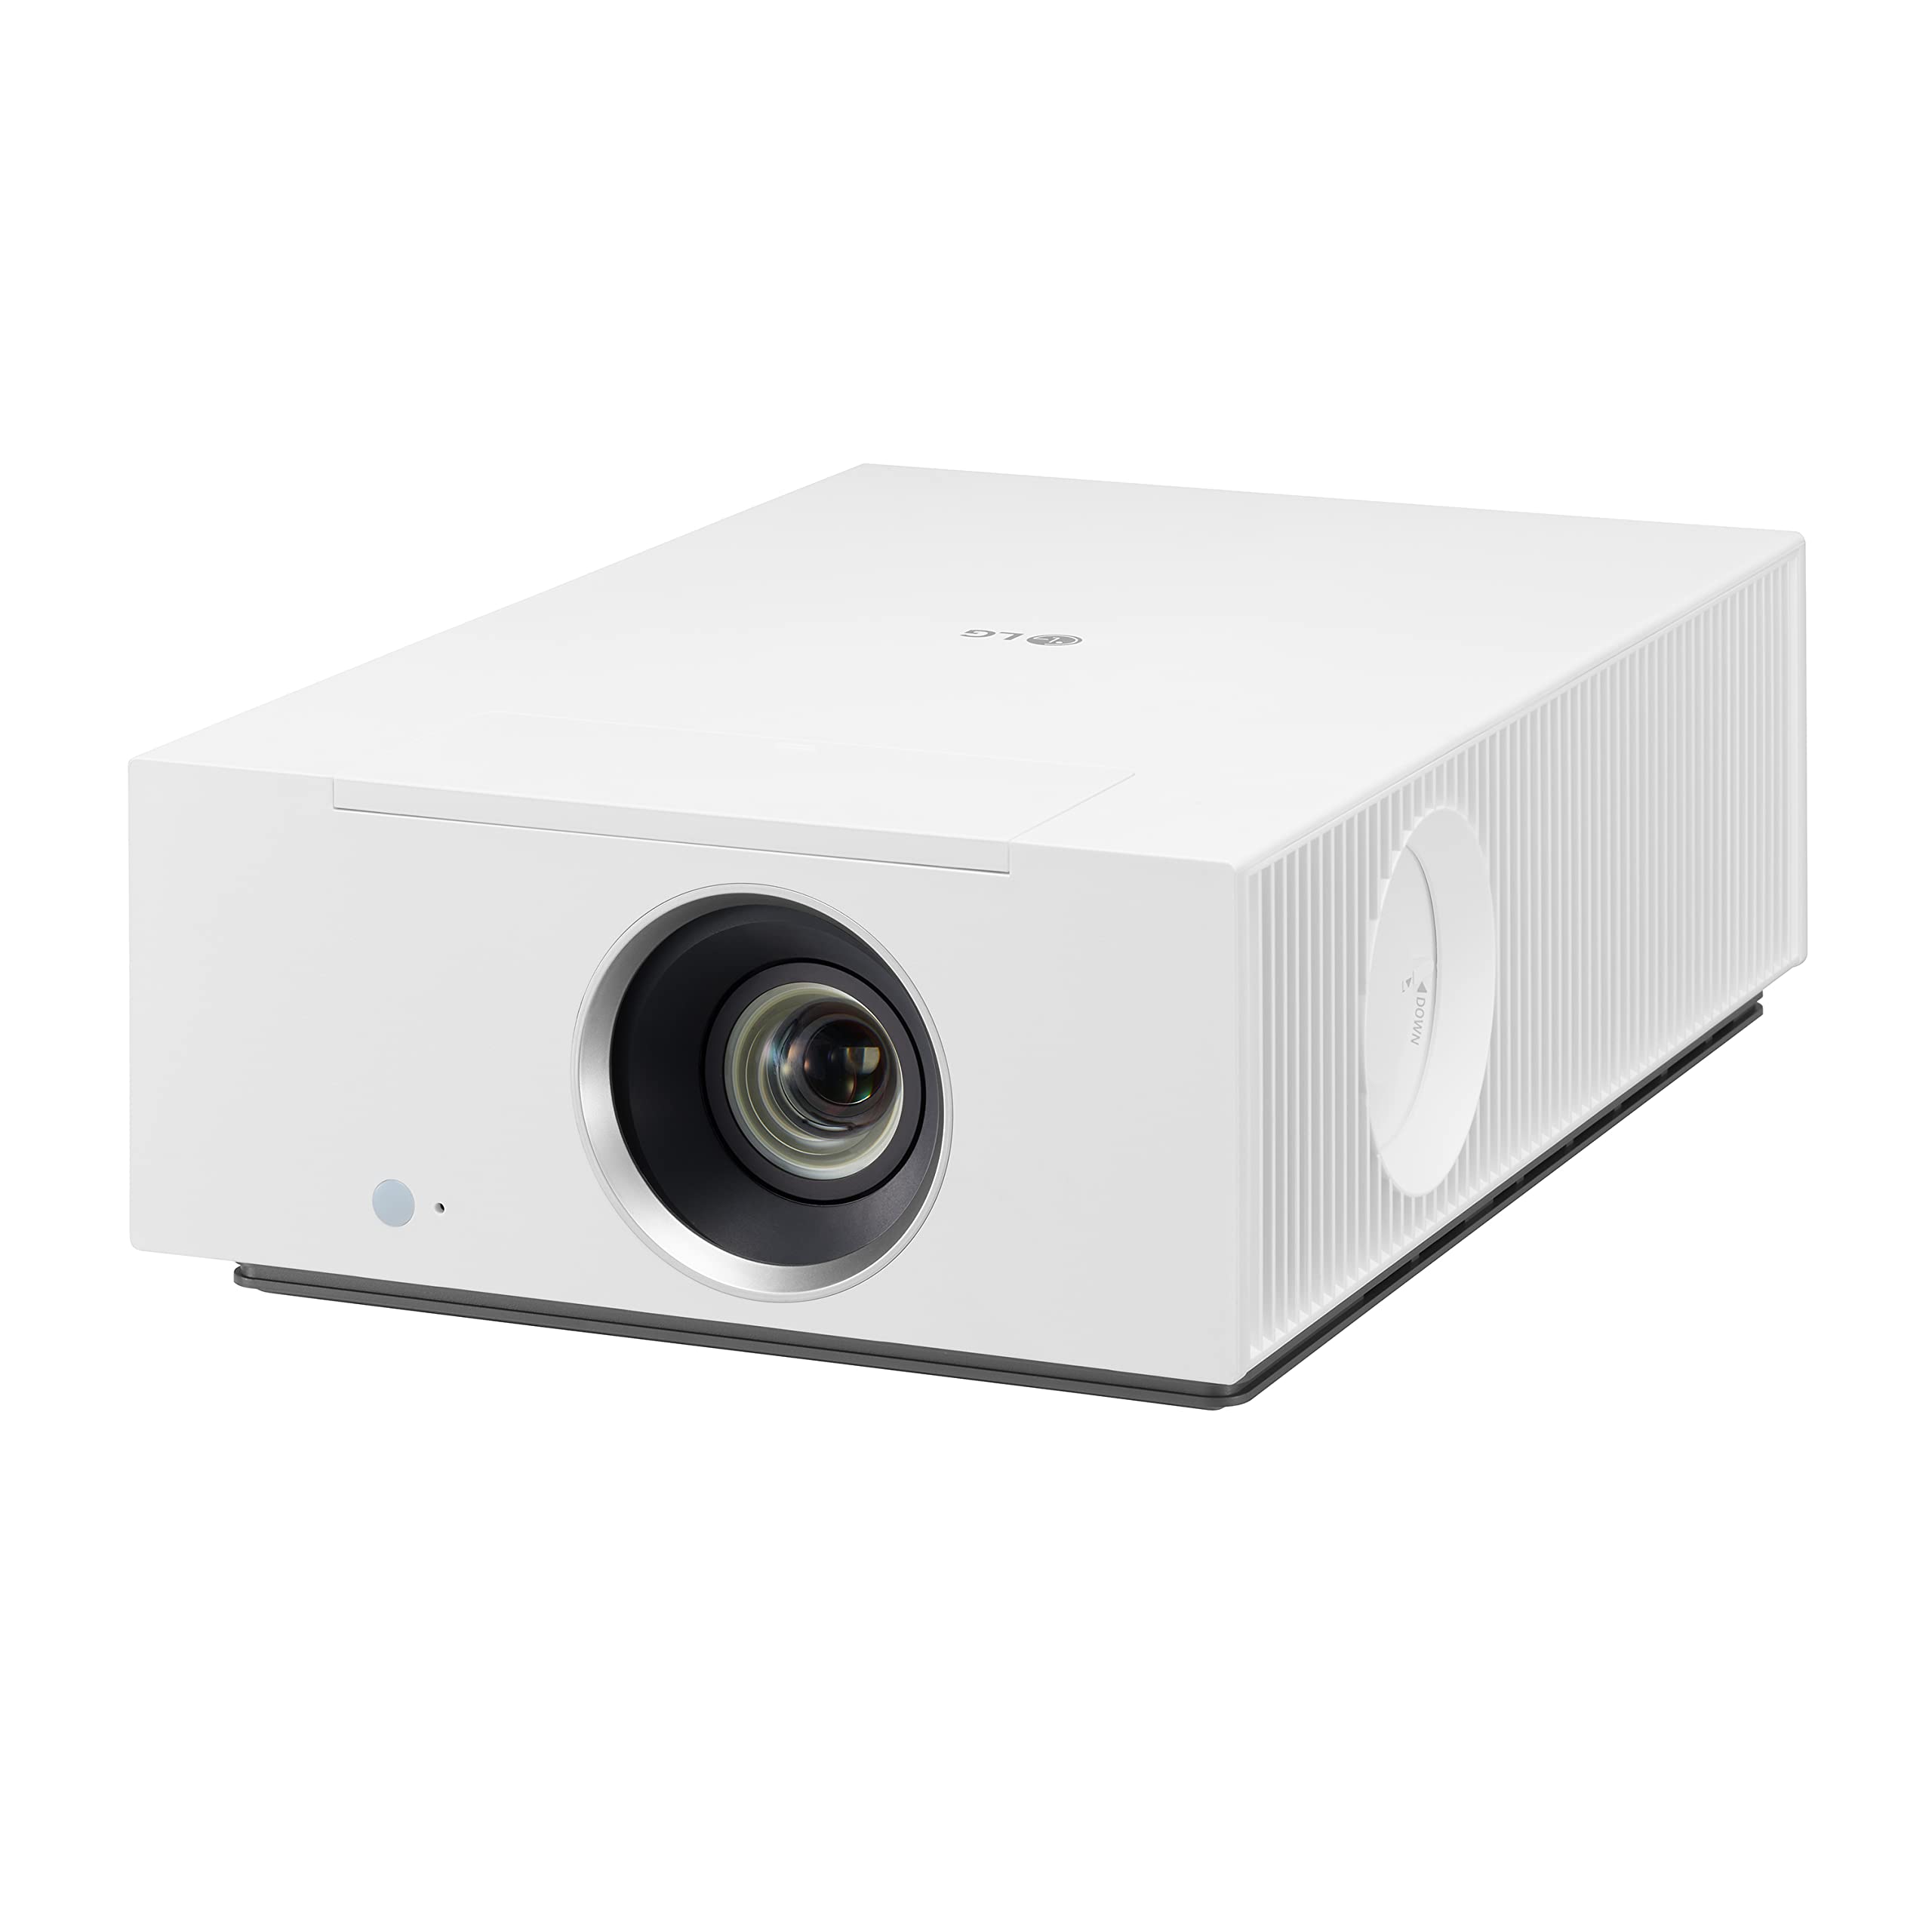 LG CineBeam UHD 4K Projector HU710PW - DLP Home Theater Smart Projector, White